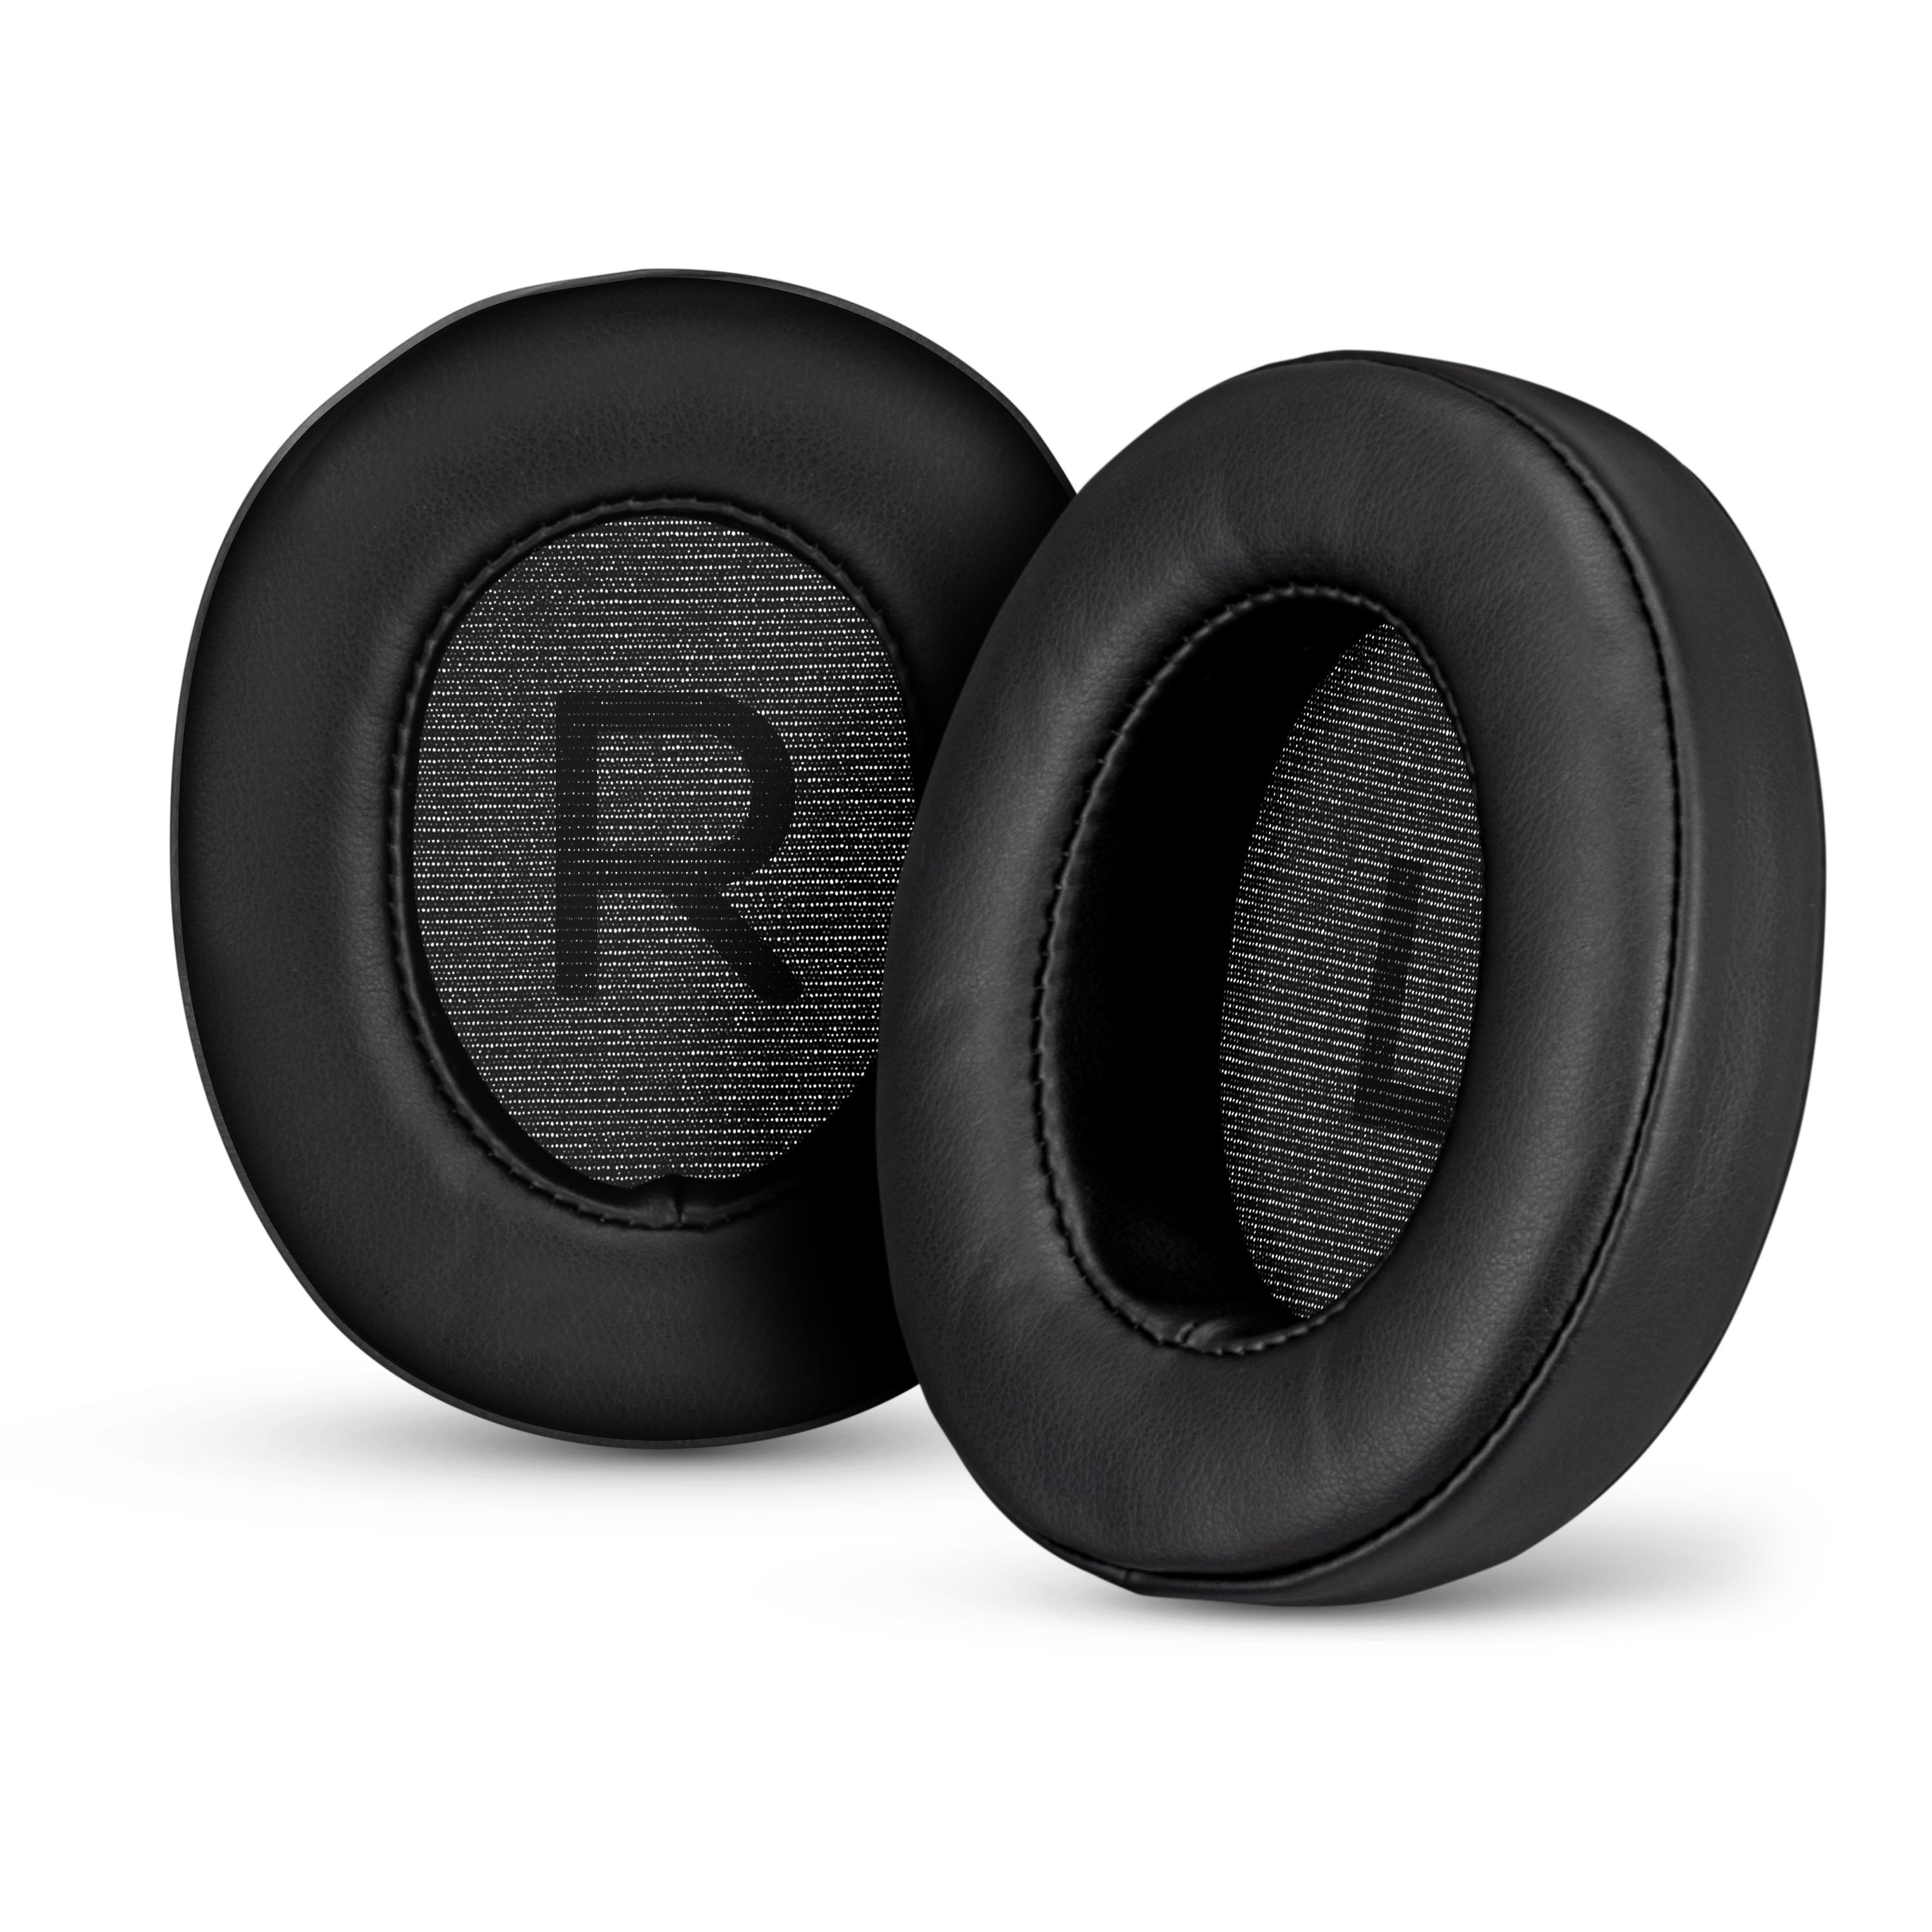 Sennheiser Momentum 3 Replacement Earpads with Thick Memory Foam